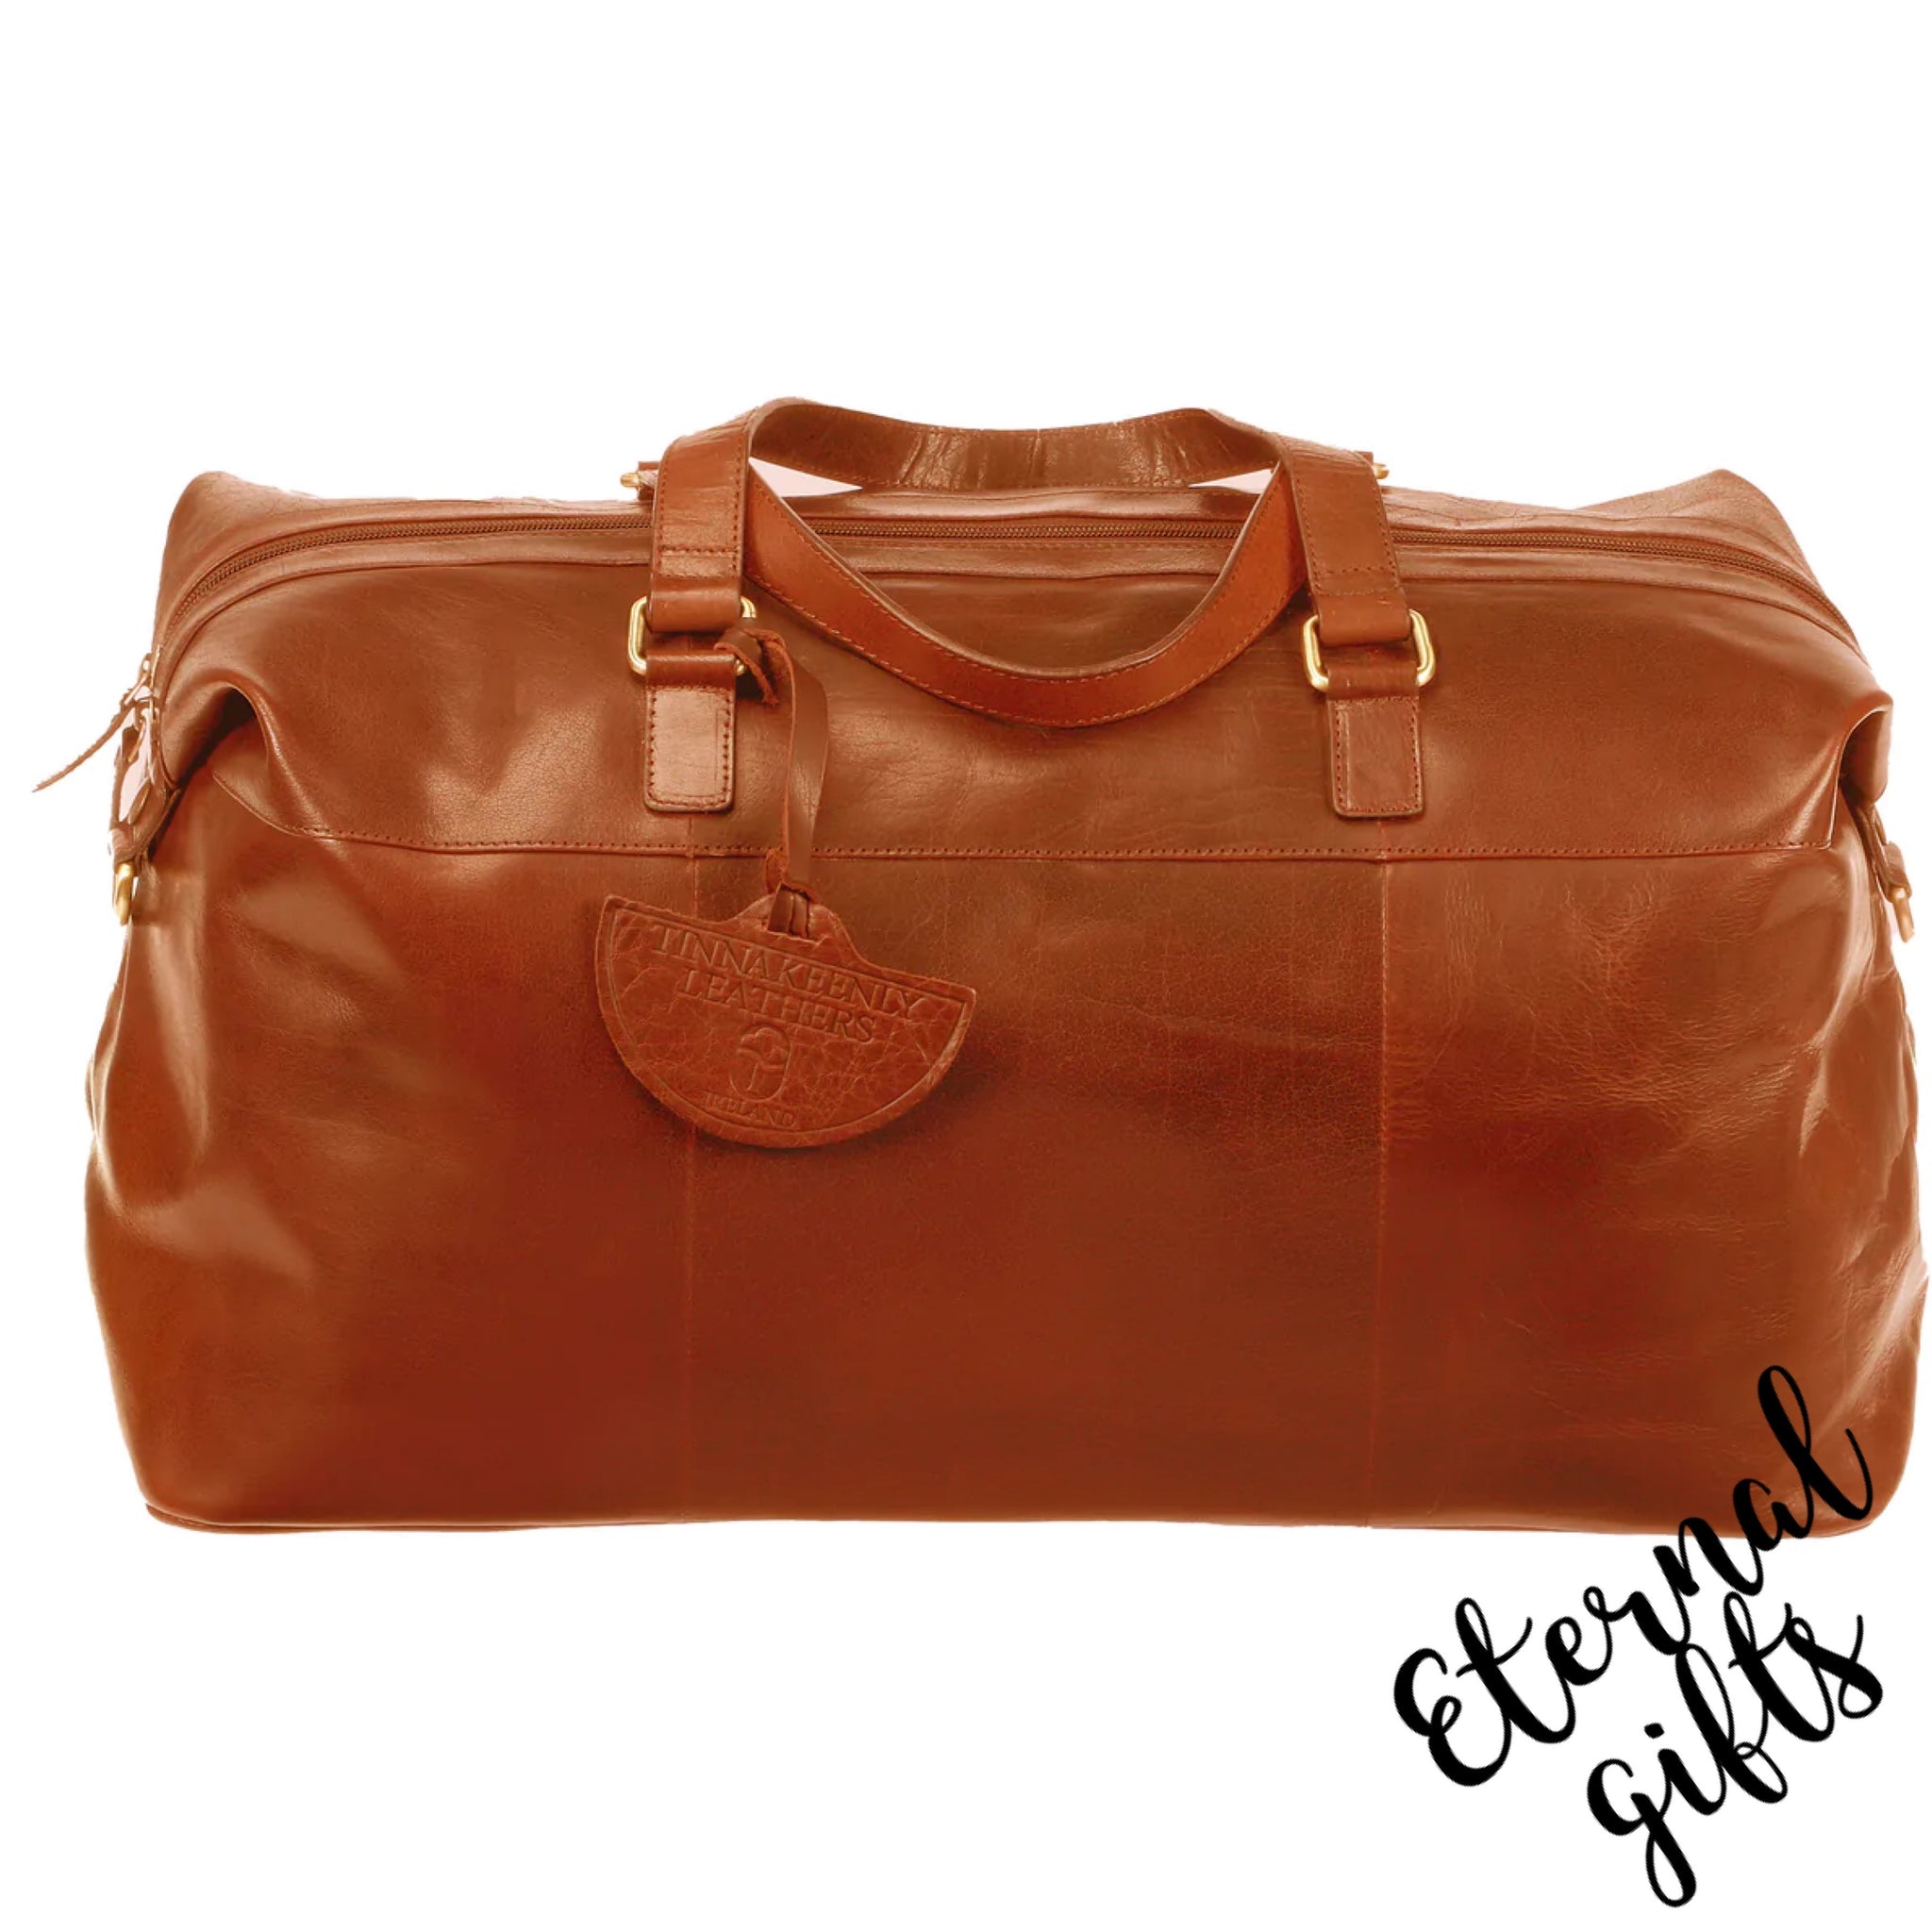 Leather Travel Bag in Tan - Tinnakeenly Leathers